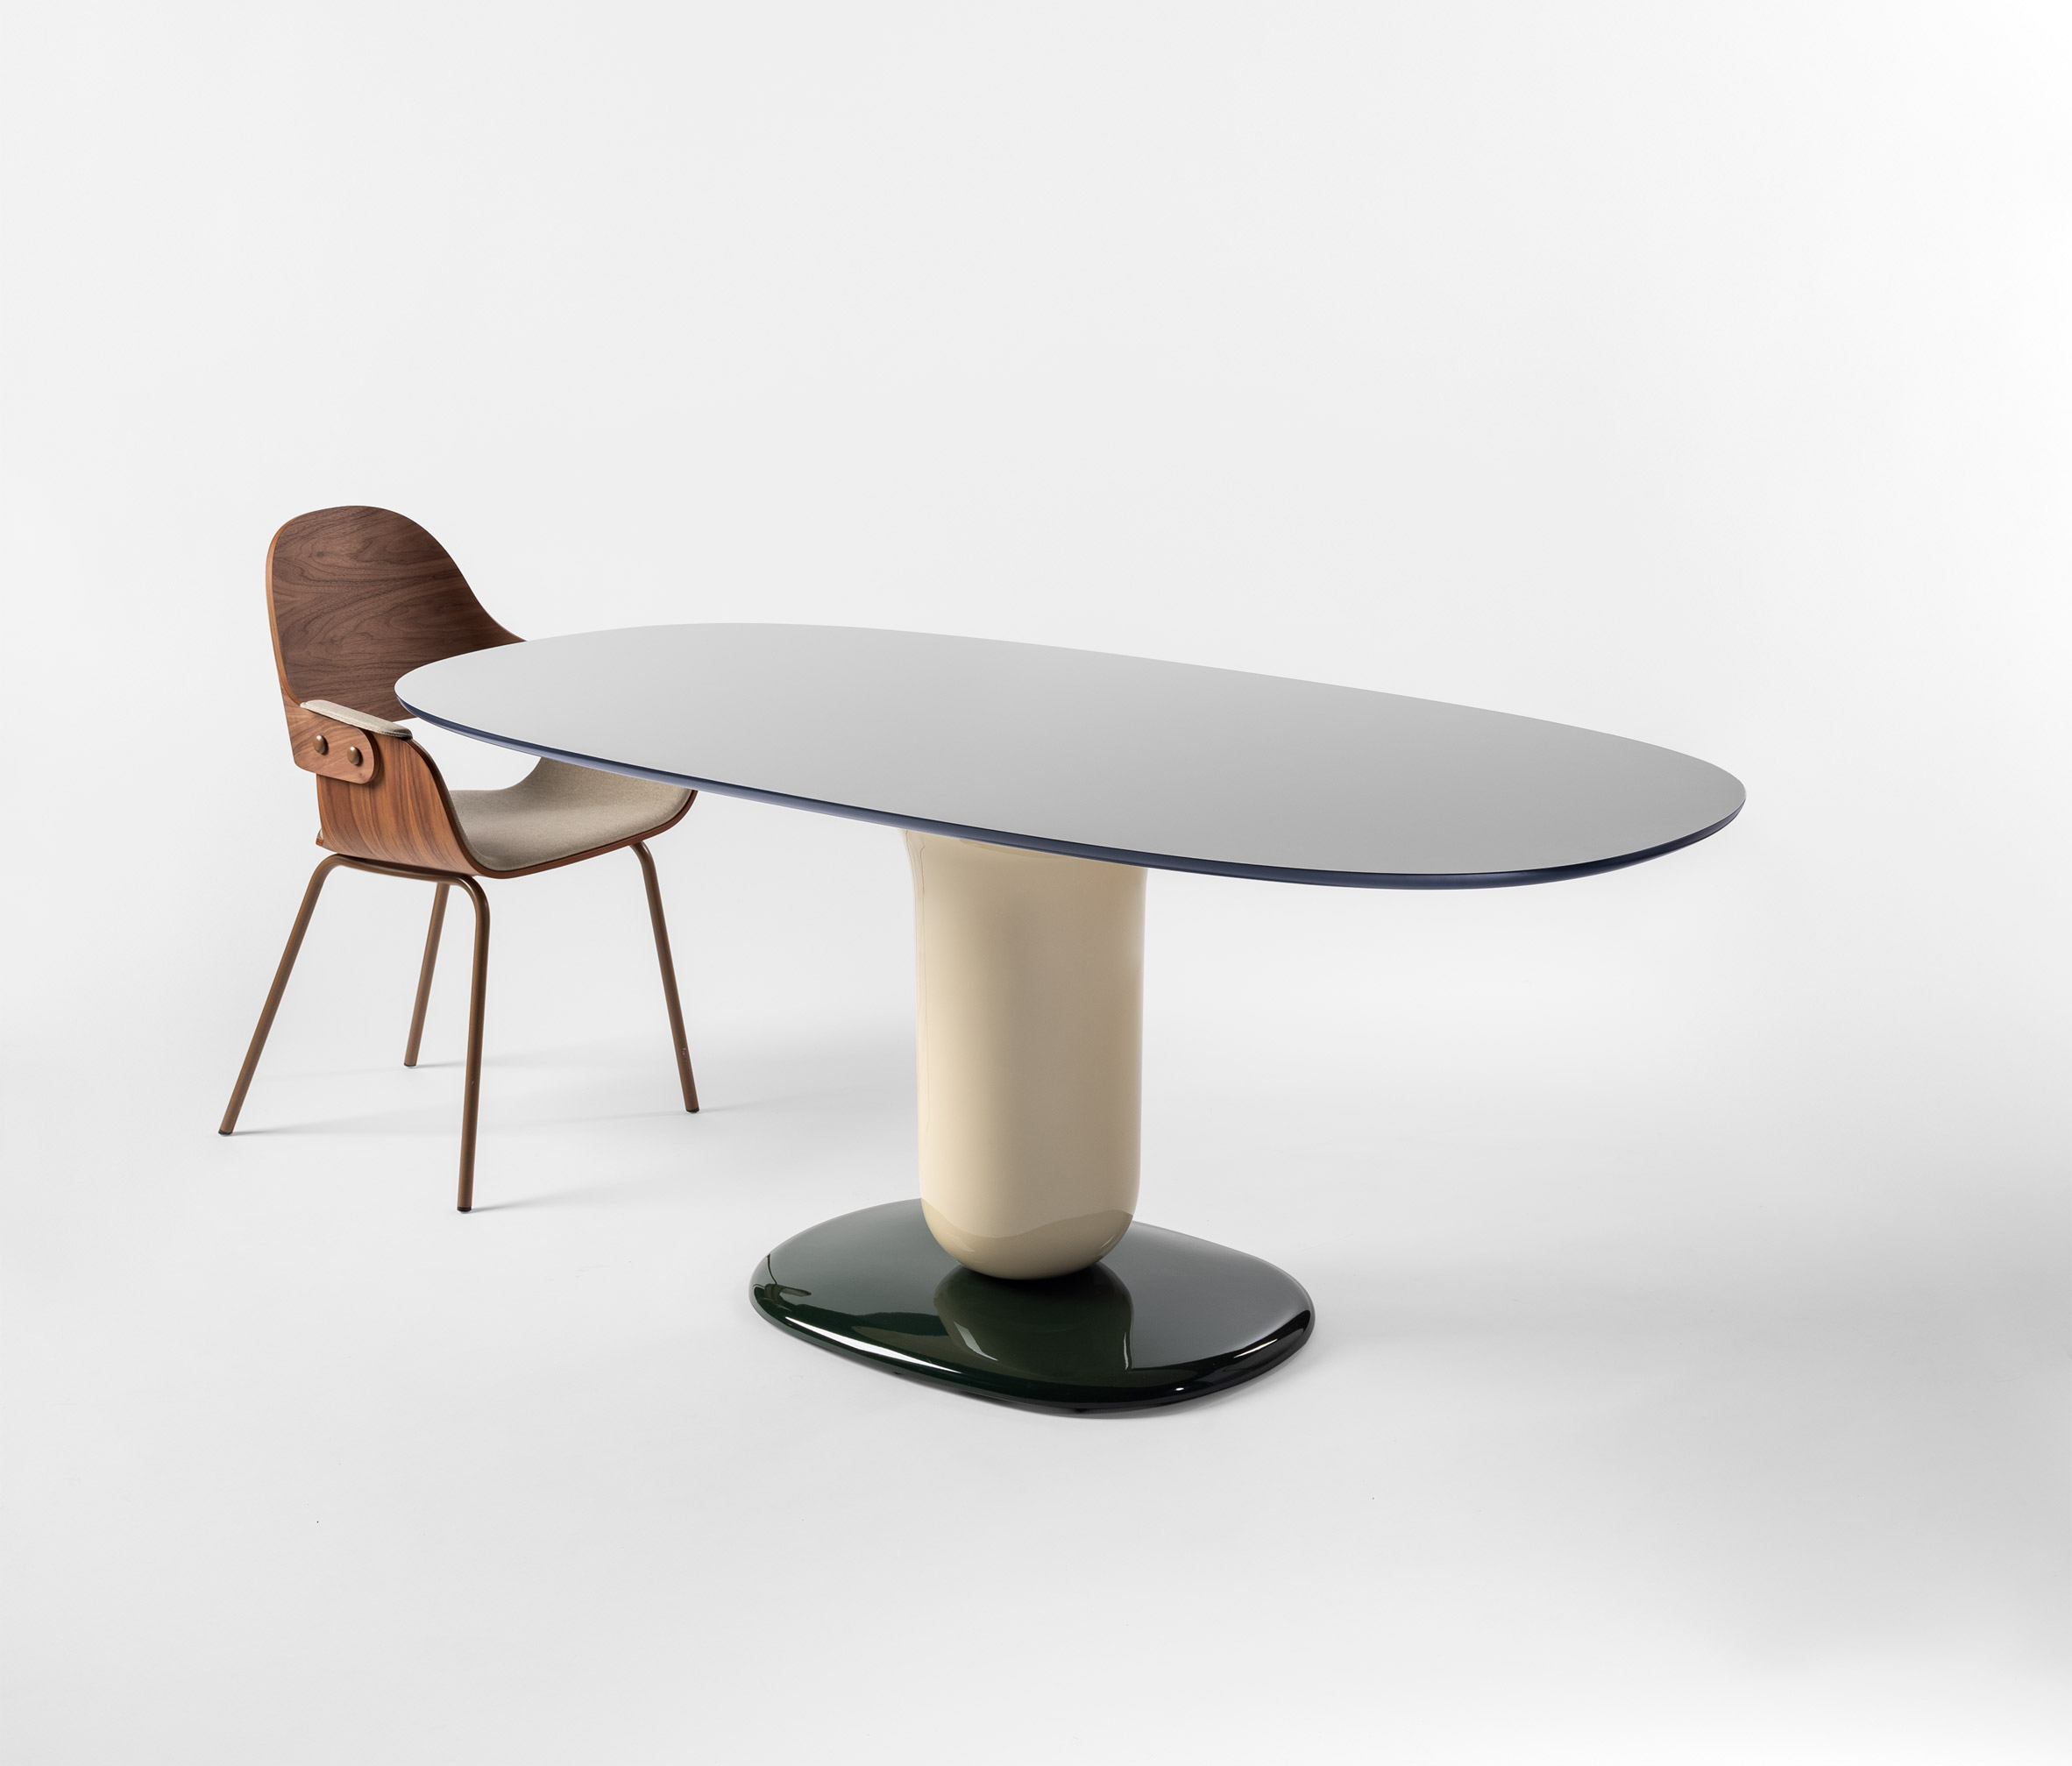 A pedestal dining table by Jaime Hayon